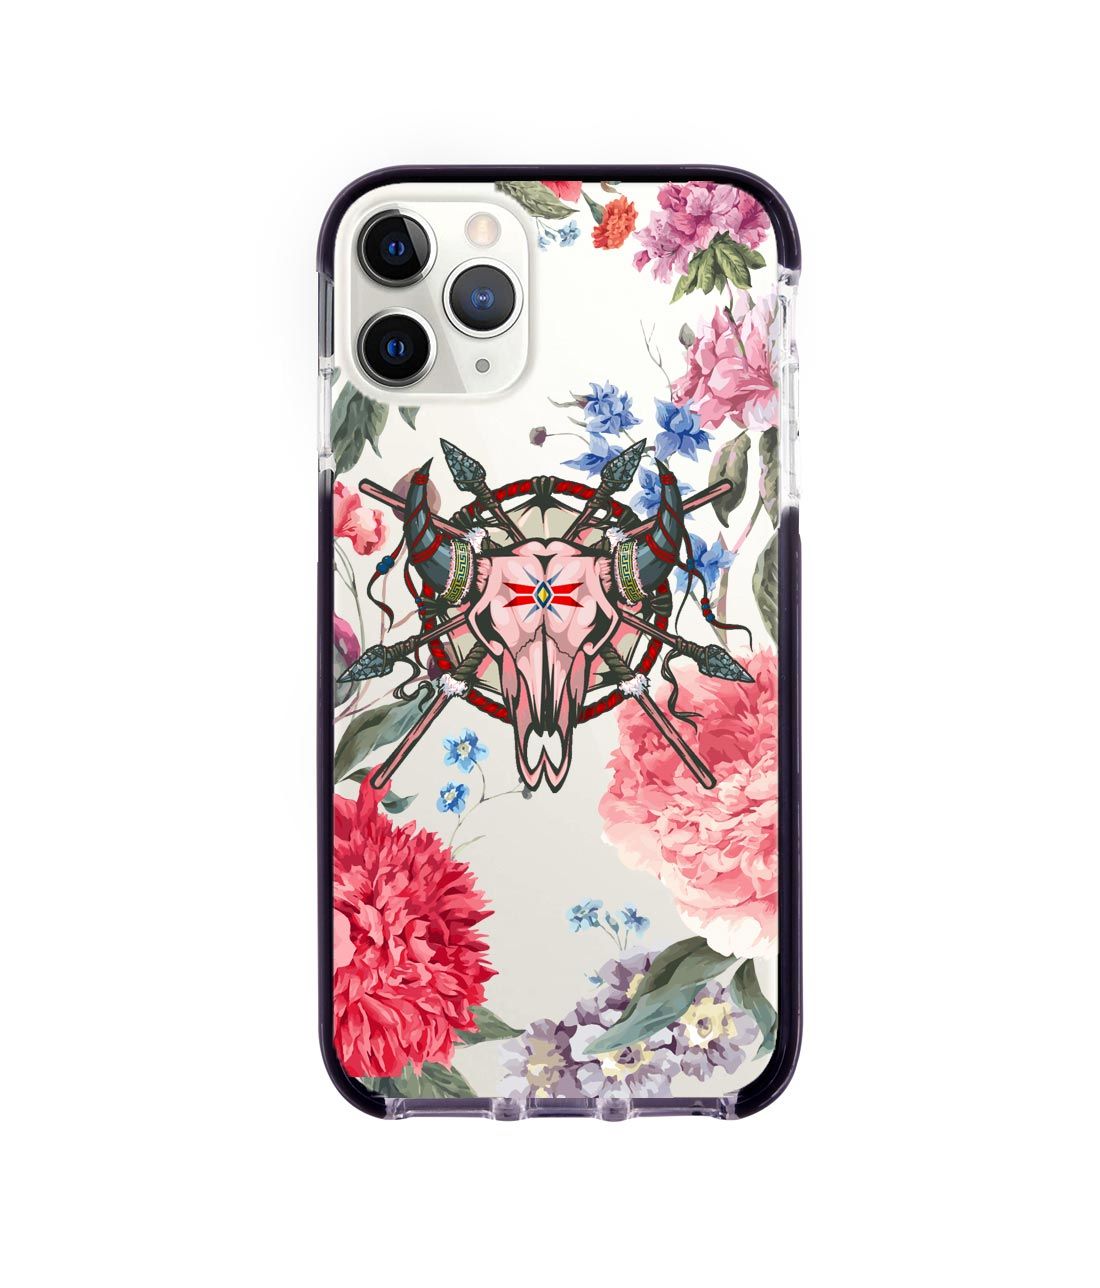 Floral Symmetry - Extreme Phone Case for iPhone 11 Pro